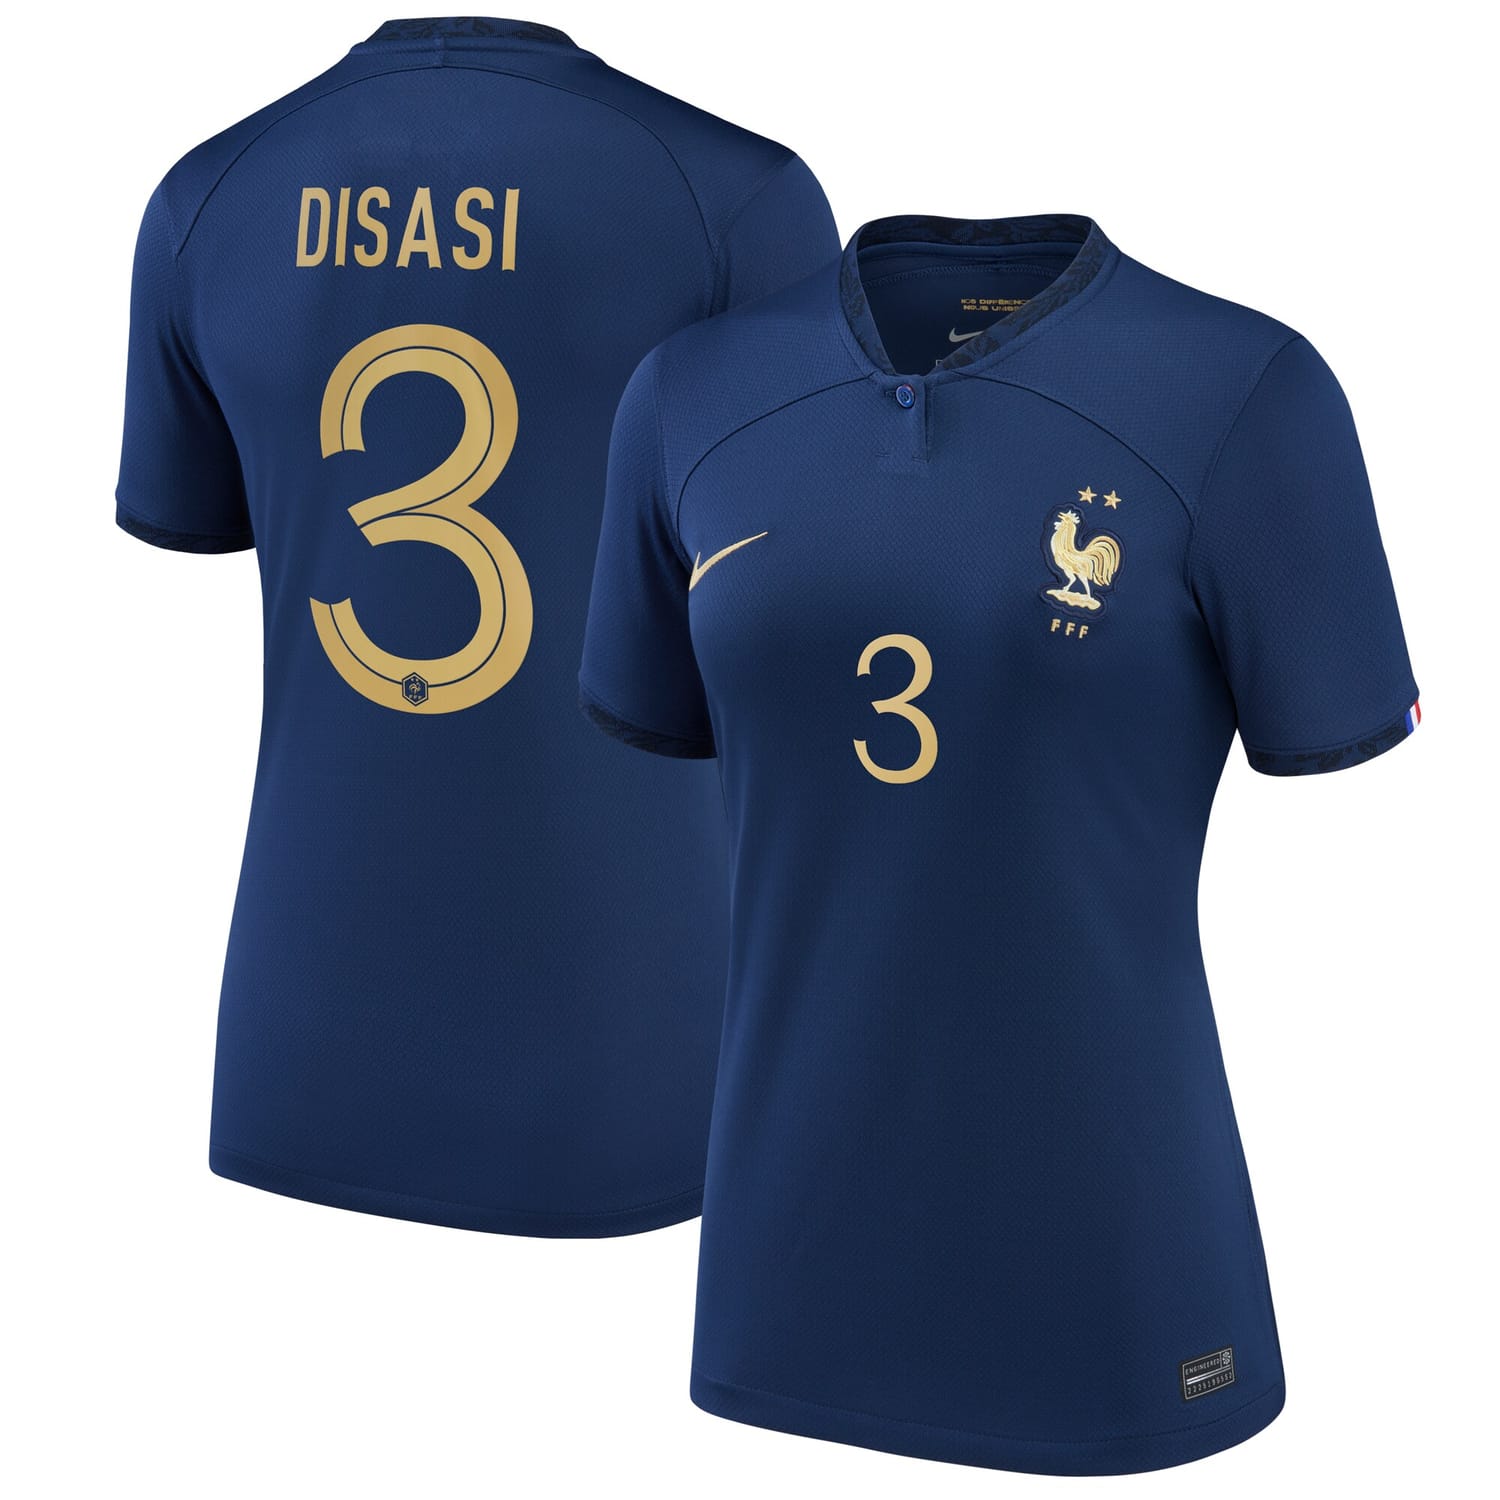 France National Team Home Jersey Shirt 2022 player Axel Disasi printing for Women